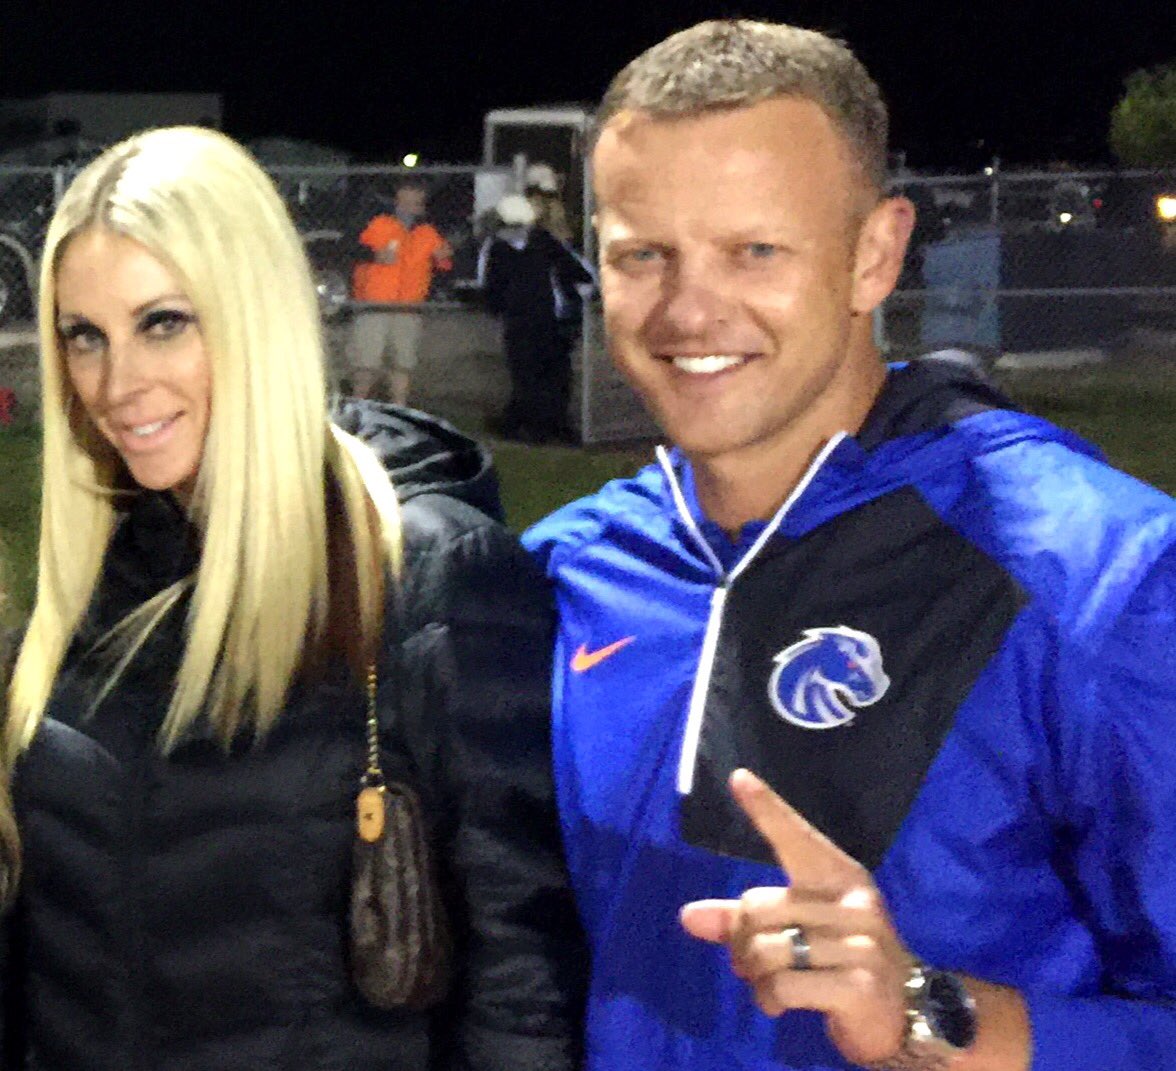 Bryan Harsin on Twitter: &quot;My beautiful wife spent her birthday with me